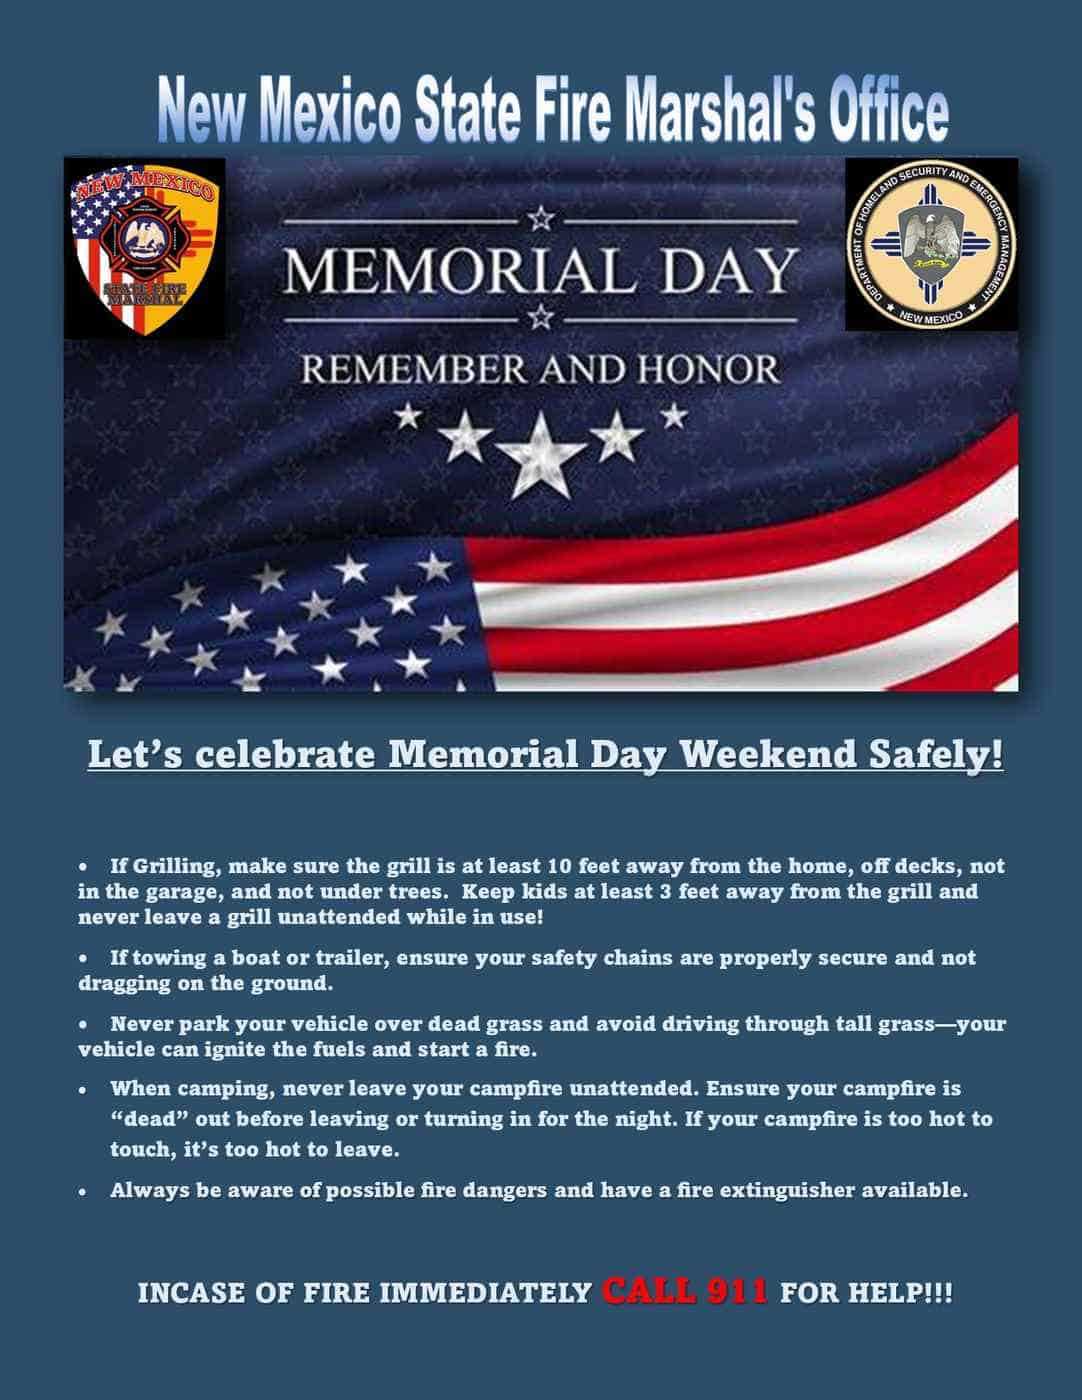 memorial day fire safety reminders